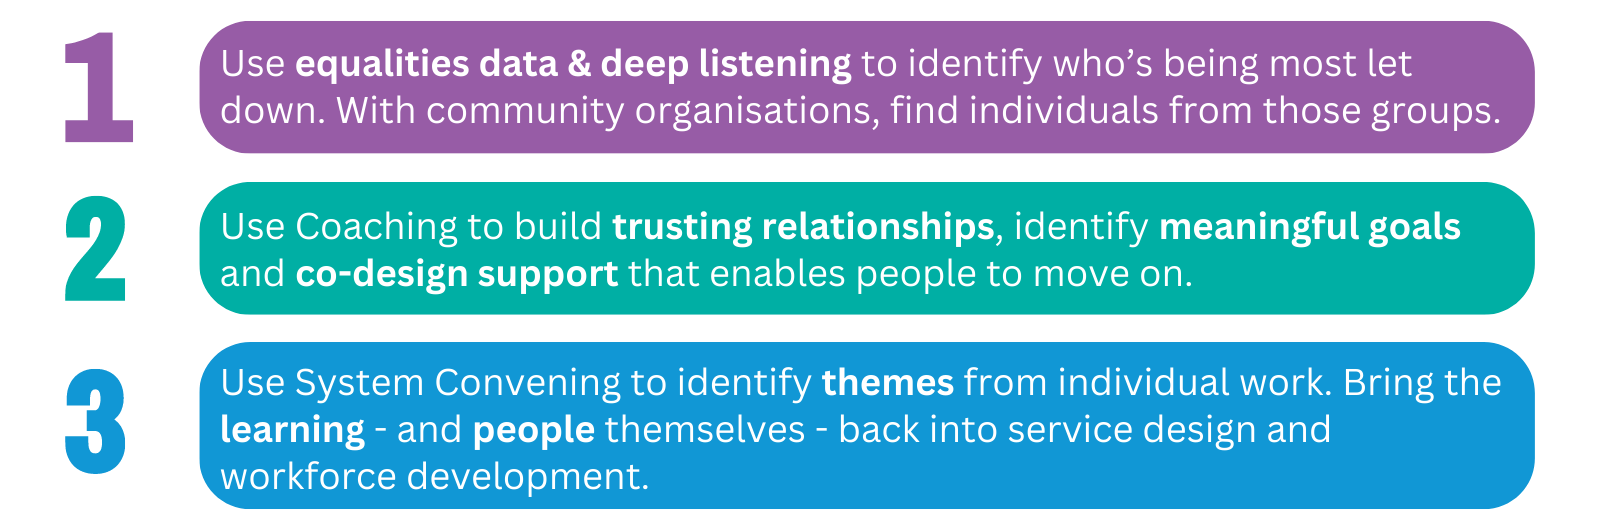 1- Use equalities data & deep listening to identify who’s being most let down. With community organisations, find individuals from those groups. 2-Use Coaching to build trusting relationships, identify meaningful goals and co-design support that enables people to move on. 3-Use System Convening to identify themes from individual work. Bring the learning - and people themselves - back into service design and workforce development. 